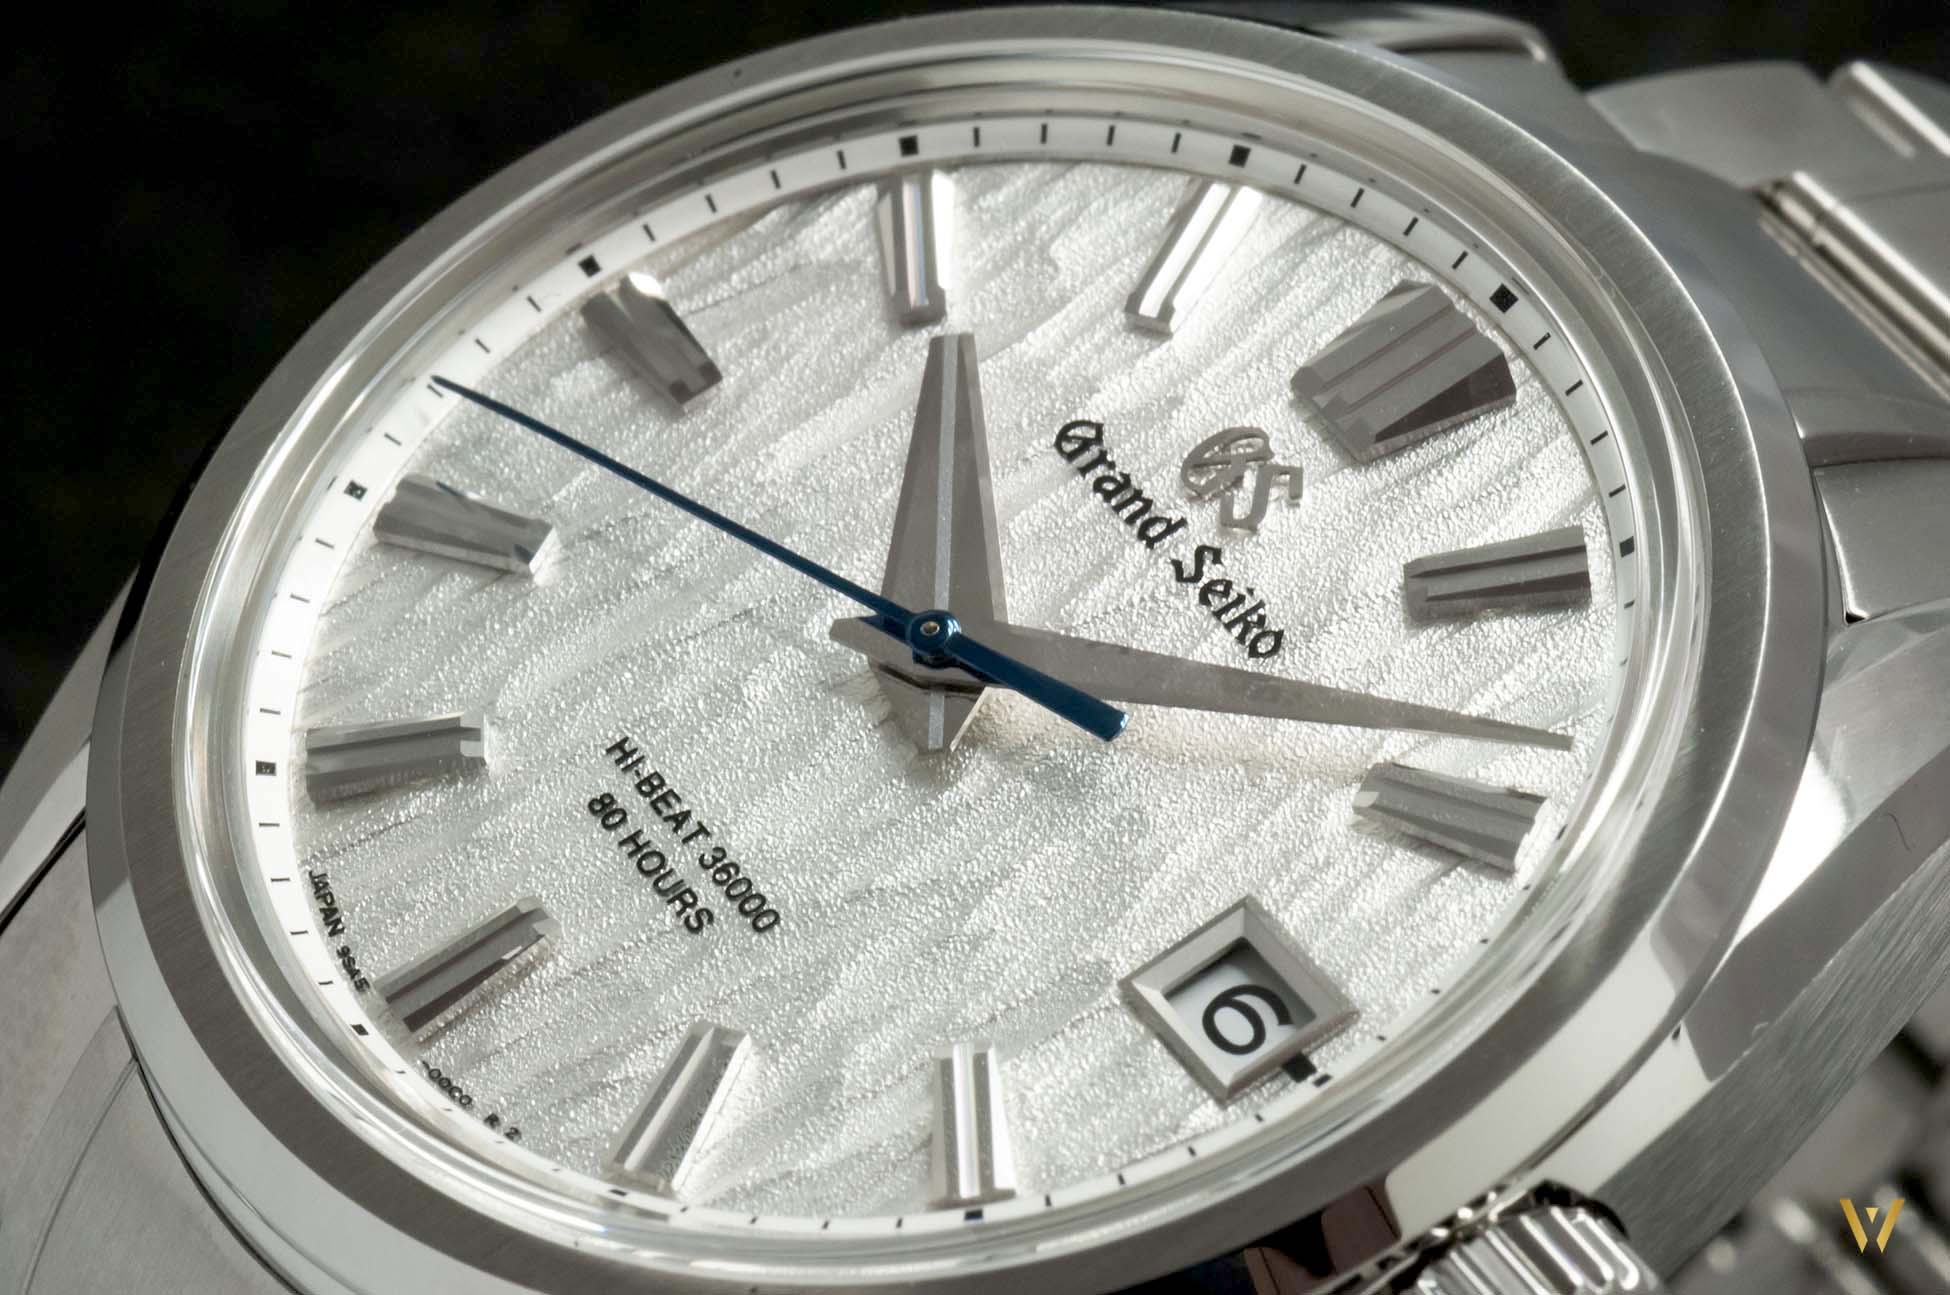 Everything about the Grand Seiko SLGH005 Hi-Beat Series 9